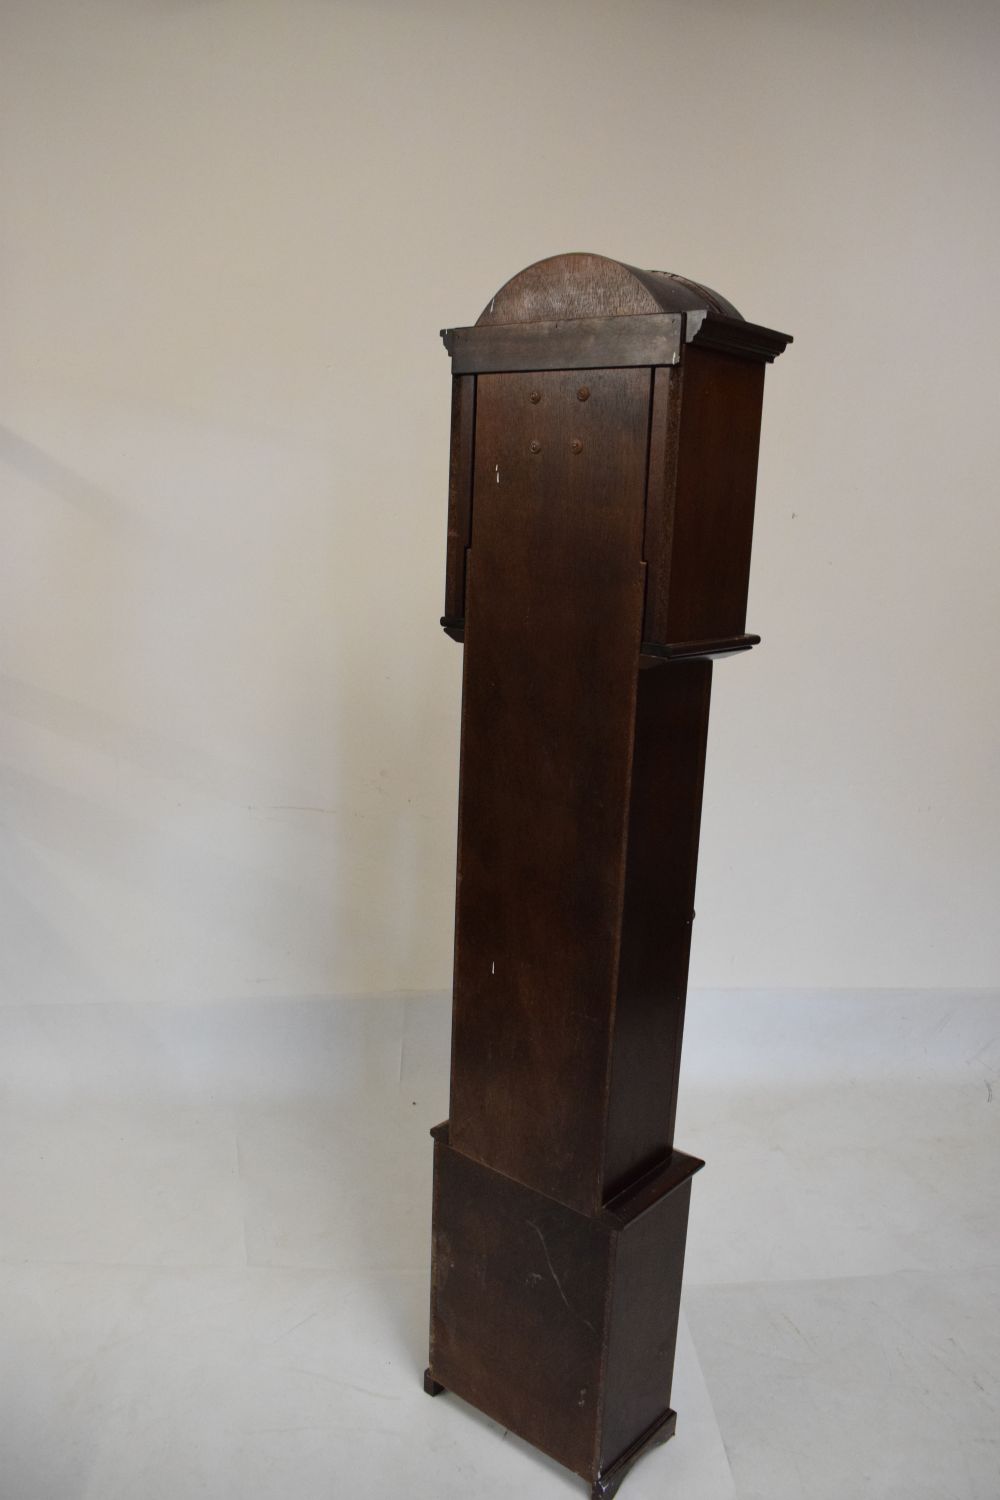 Reproduction mahogany cased chiming grandmother clock by Fenclocks, Suffolk, 179.5cm high - Image 5 of 6